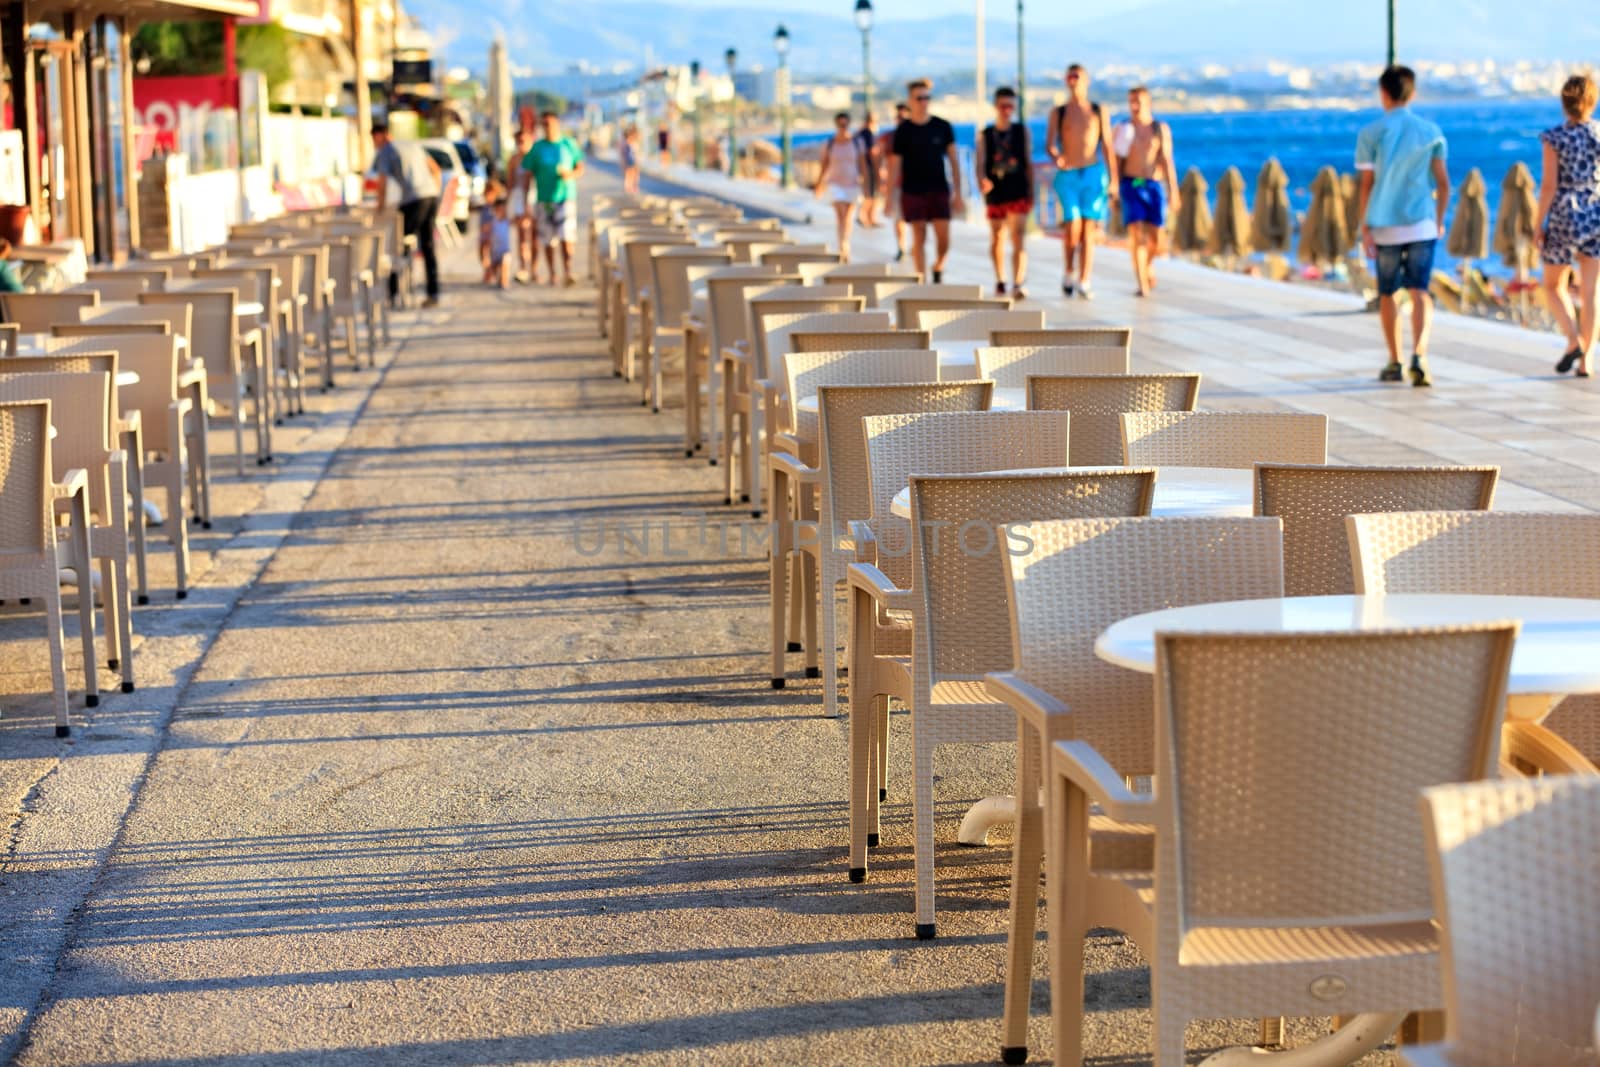 Tables and chairs of the beach cafe are located along the seafront, along which resting people and children walk in blur, image with copy space.